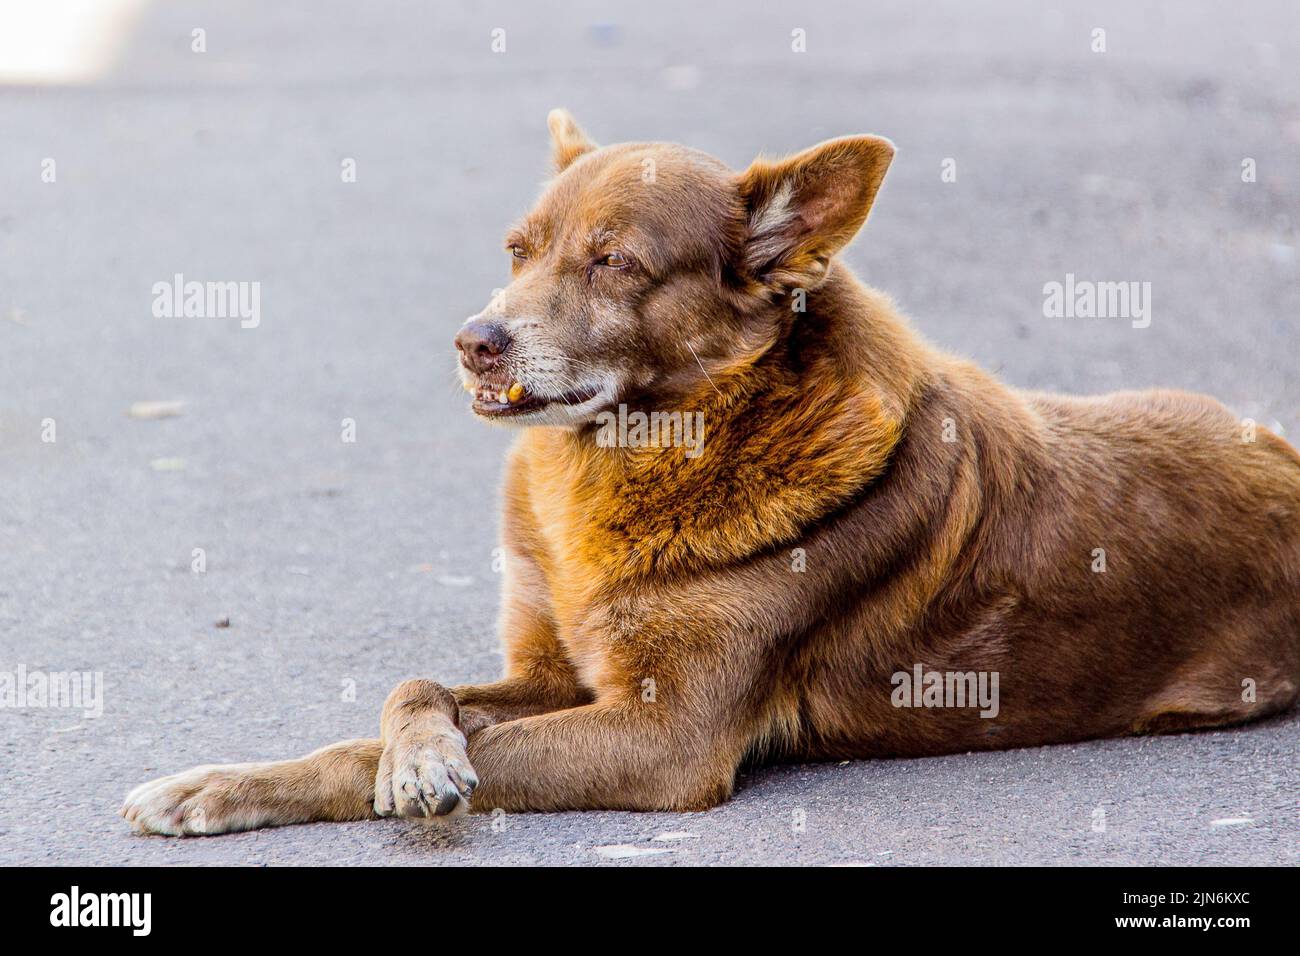 dog popularly known as mutts Stock Photo